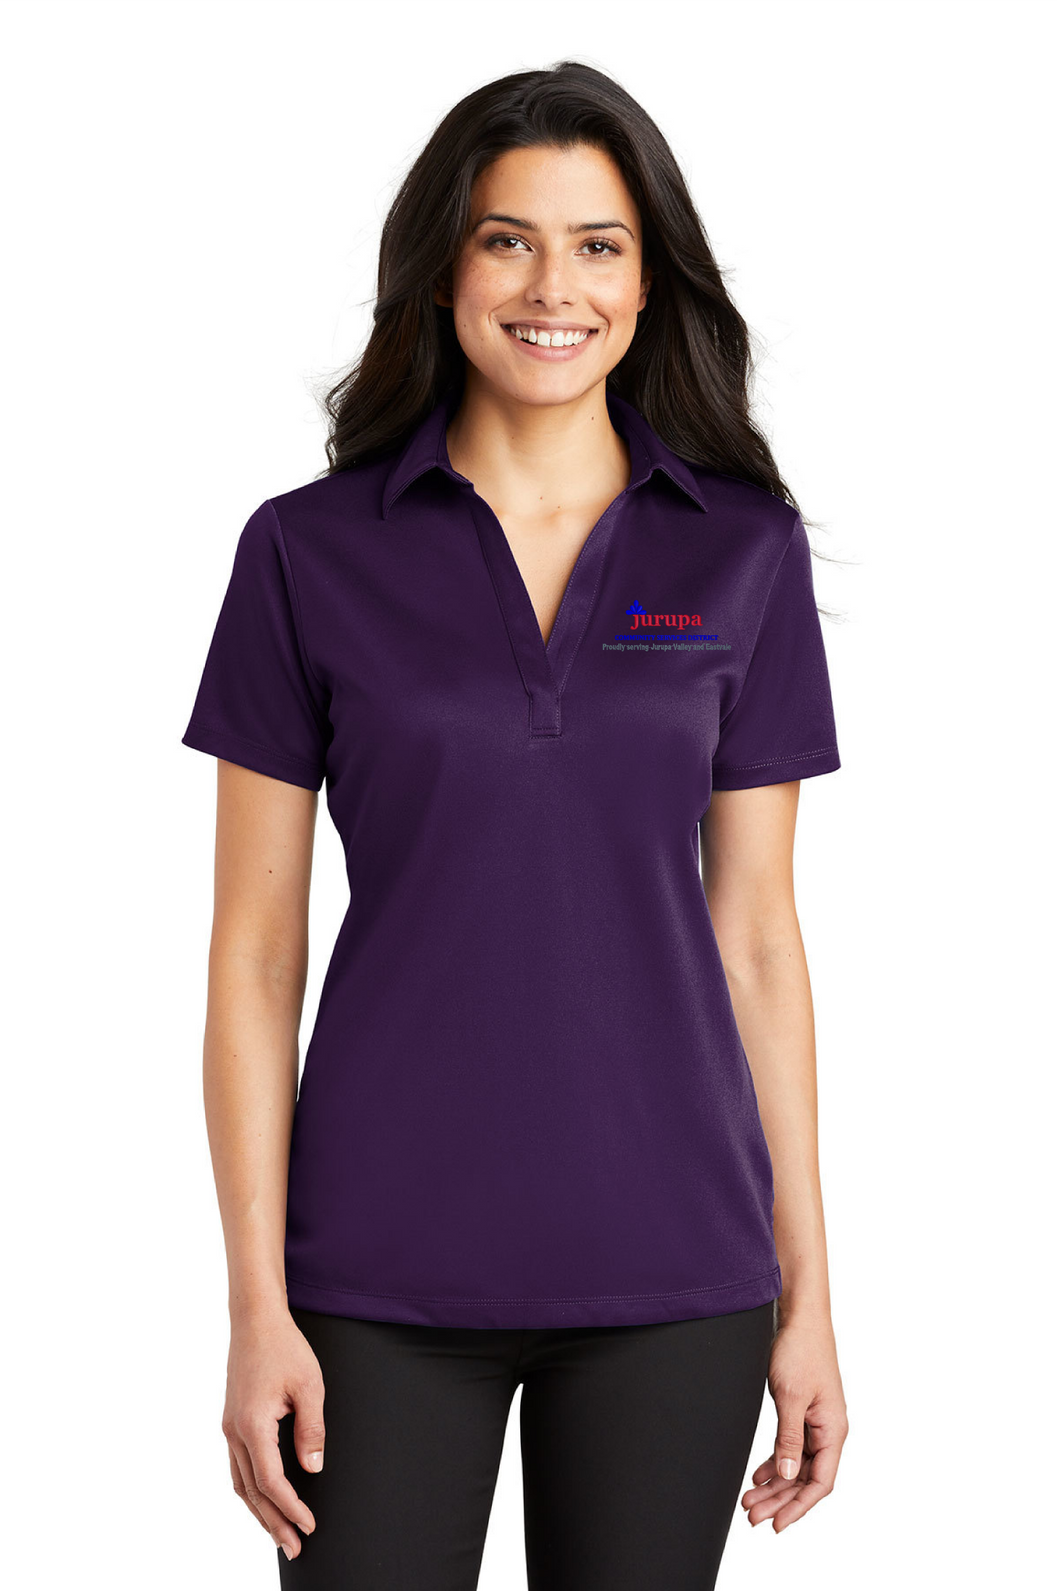 JCSD Ladies Silk Touch Performance Polo L540